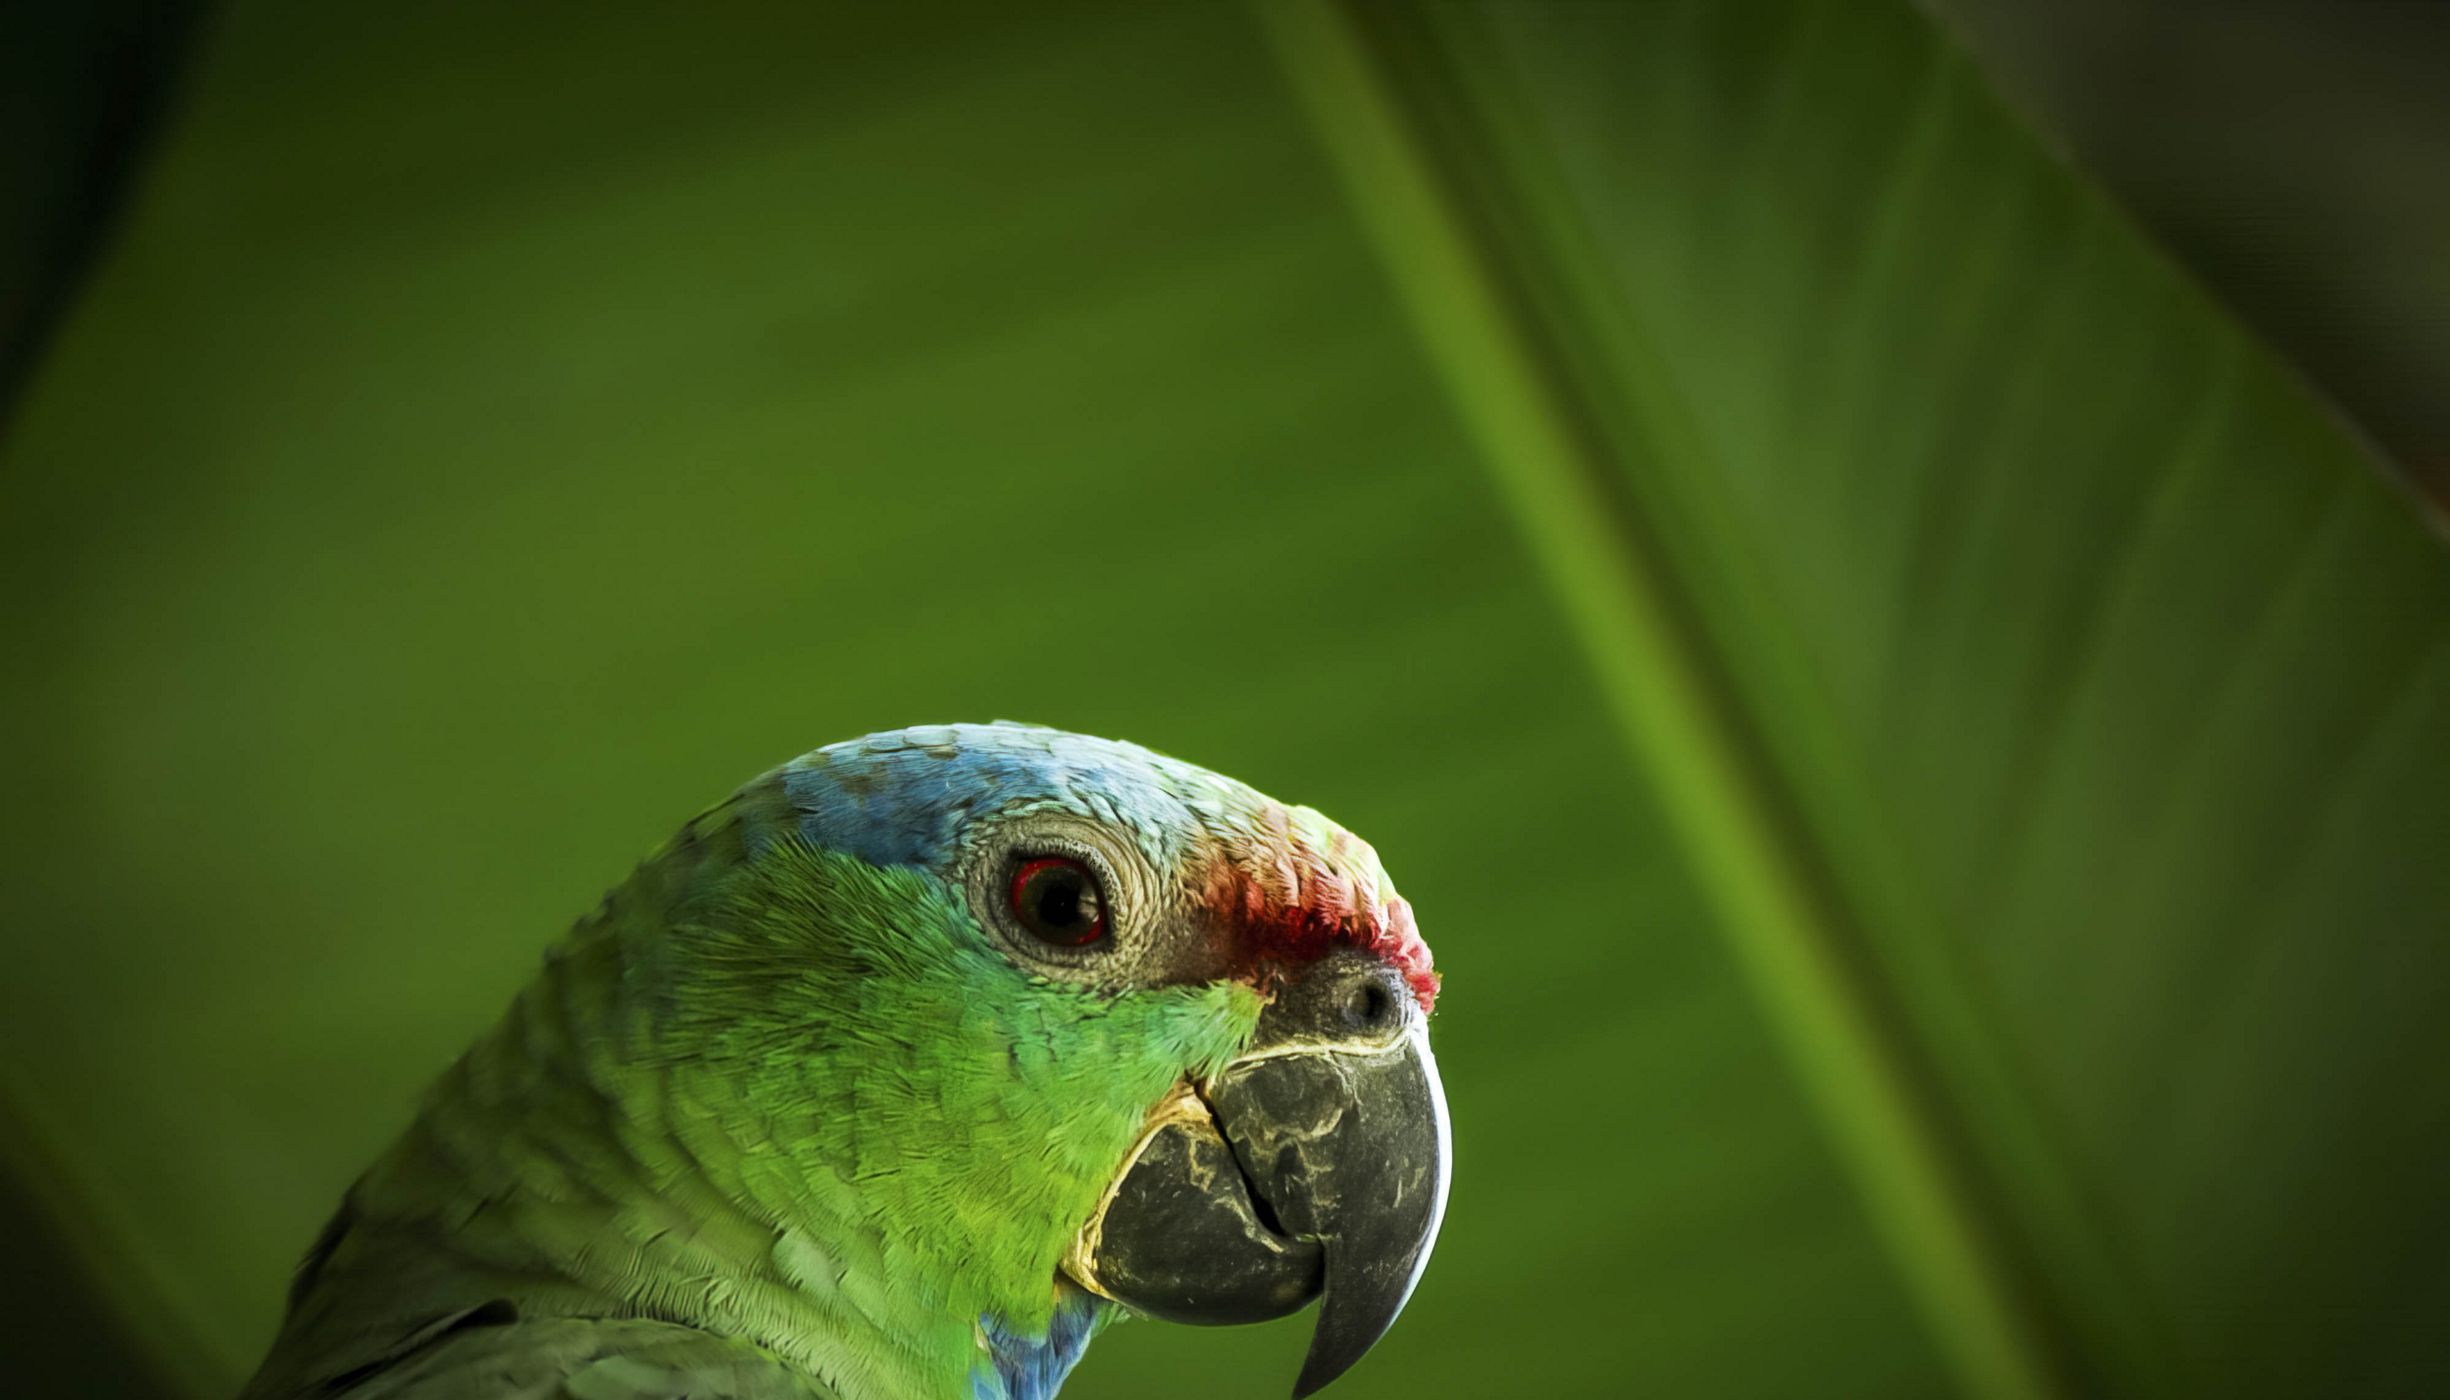 A red-browed parrot in the Amazon rainforest